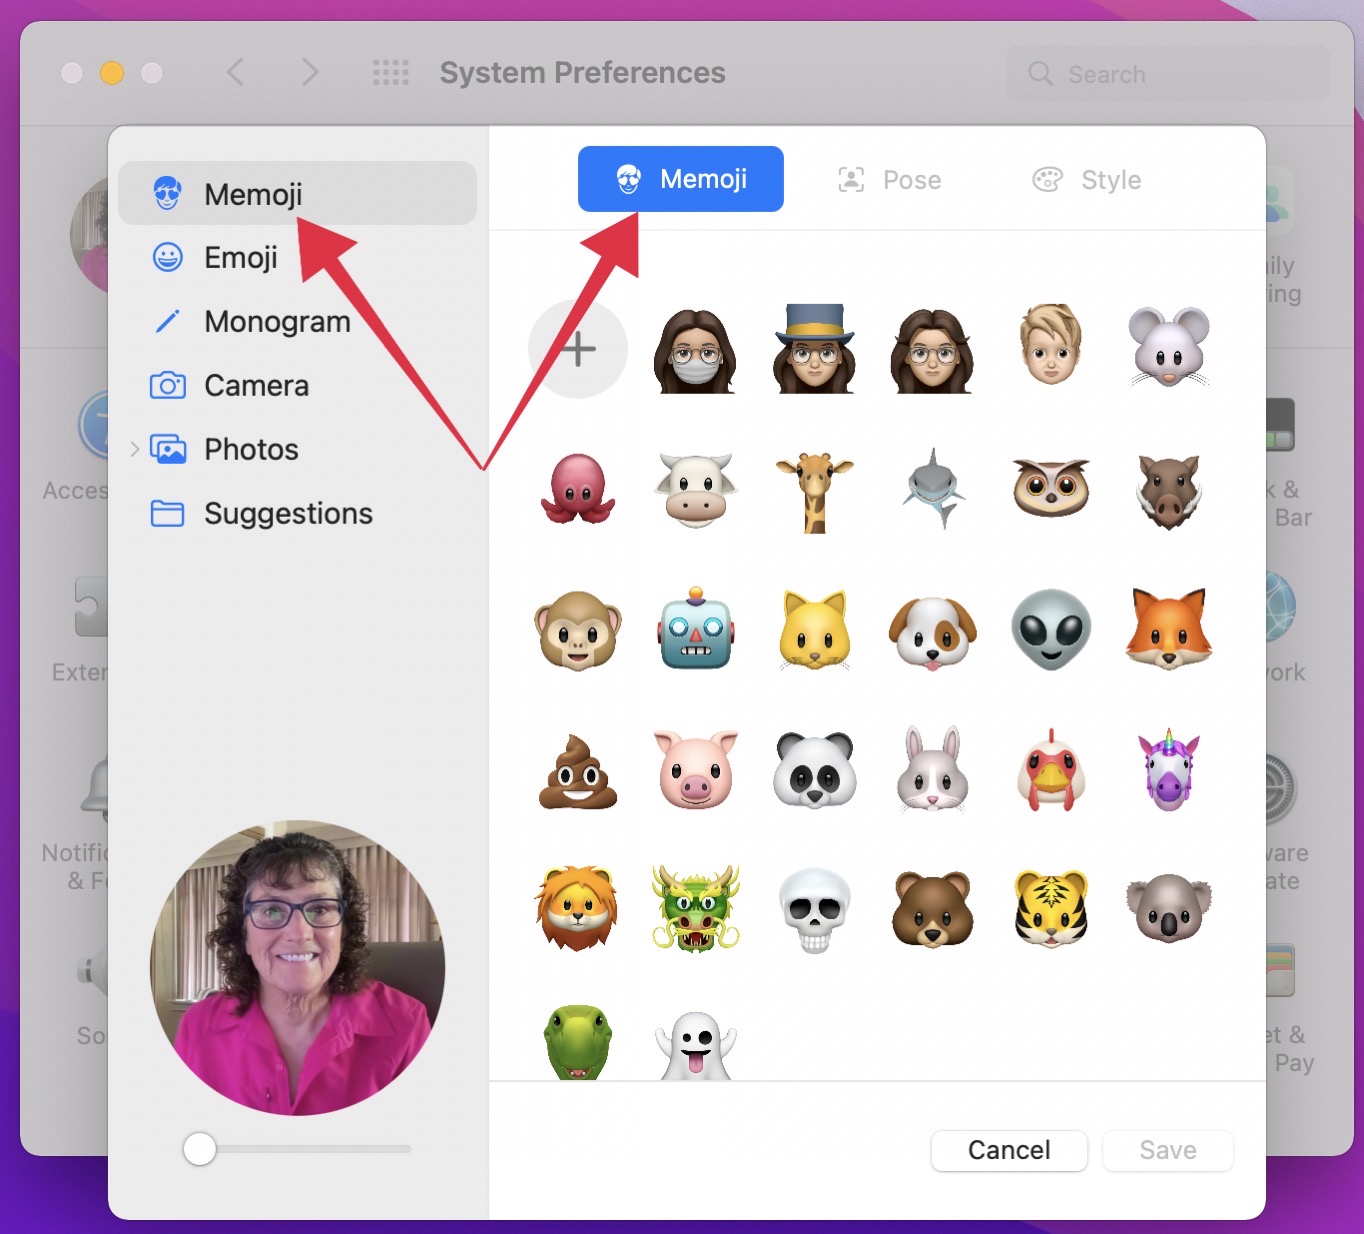 Select Memoji on Left and Top Right